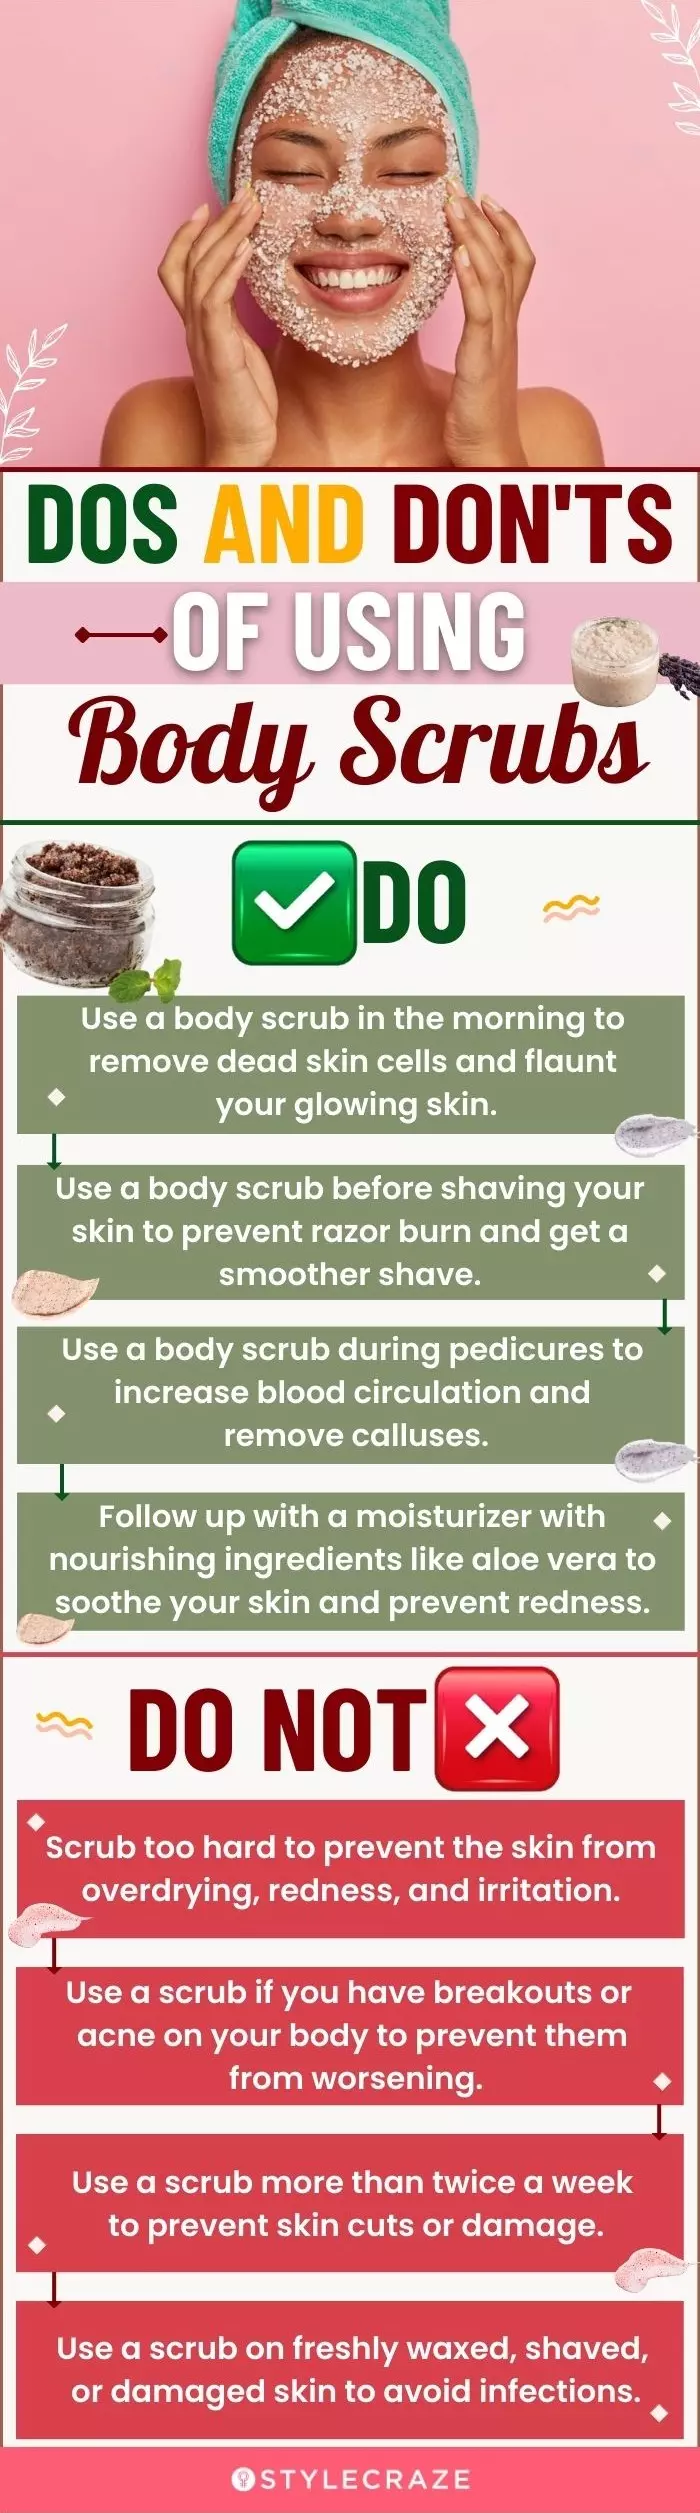 Dos And Don’ts Of Using Body Scrubs (infographic)